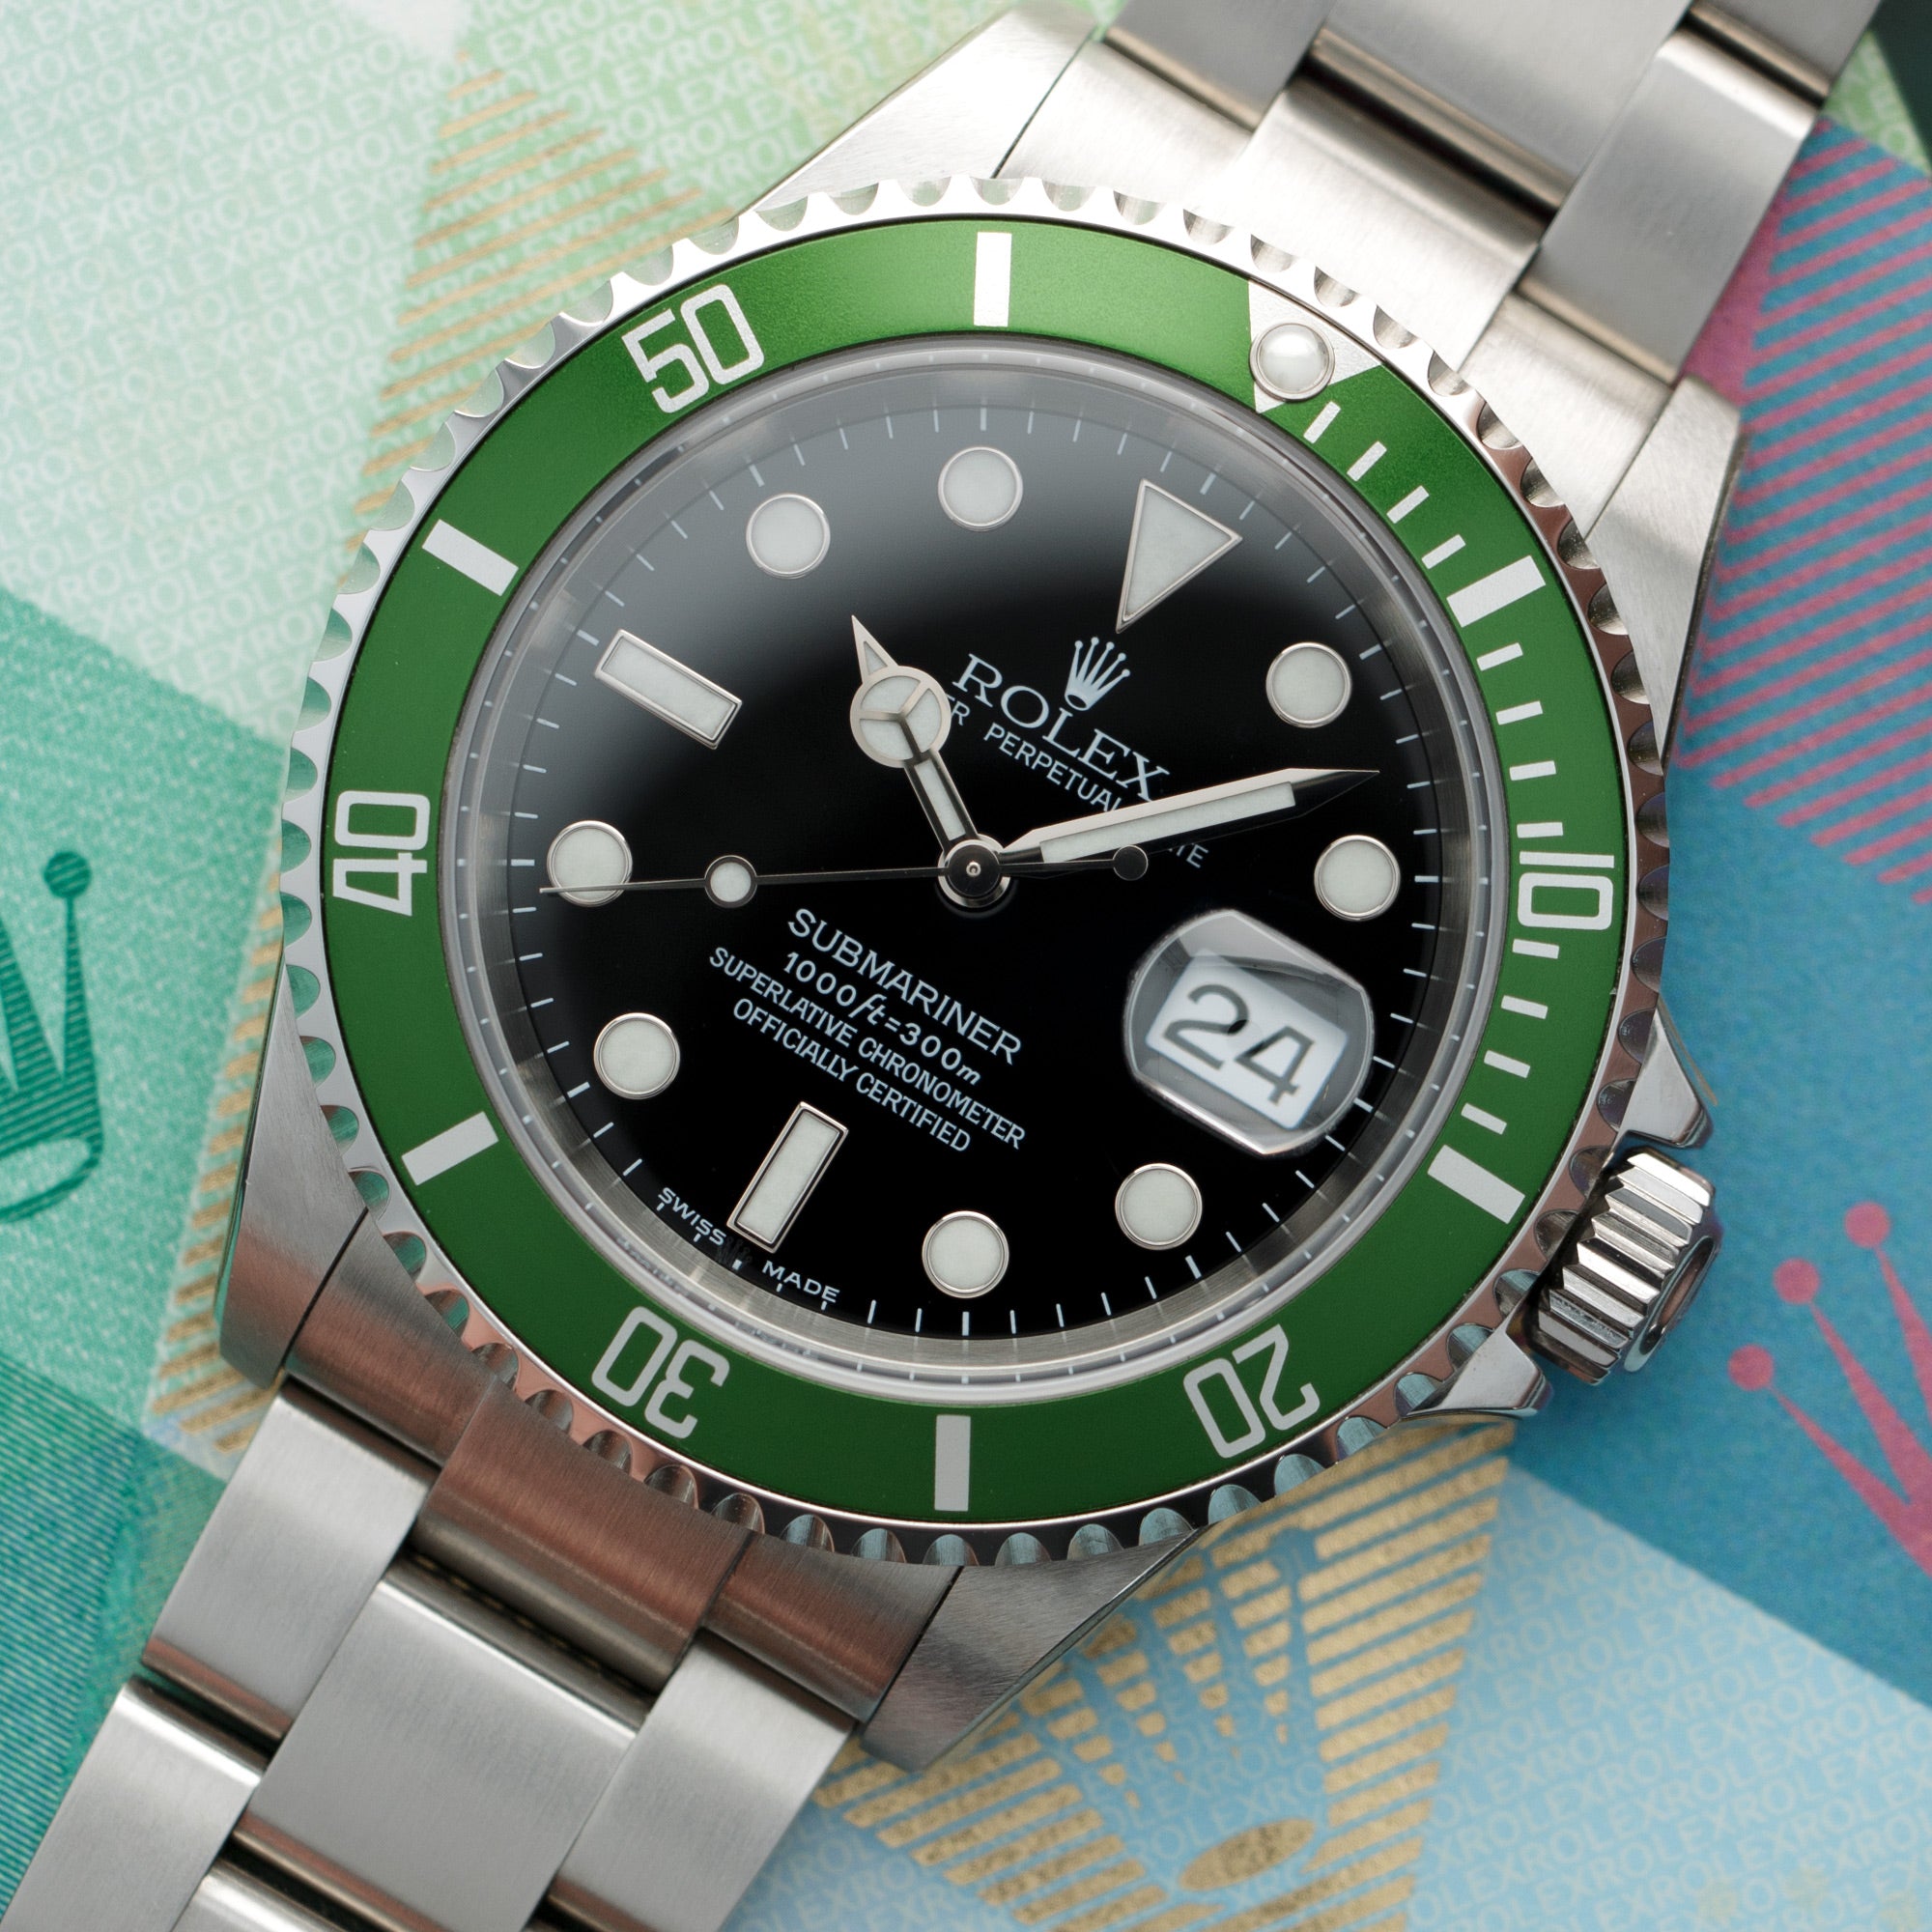 Rolex - Rolex Anniversary Flat Four Submariner Ref. 16610, with Original Box and Papers New Old Stock - The Keystone Watches